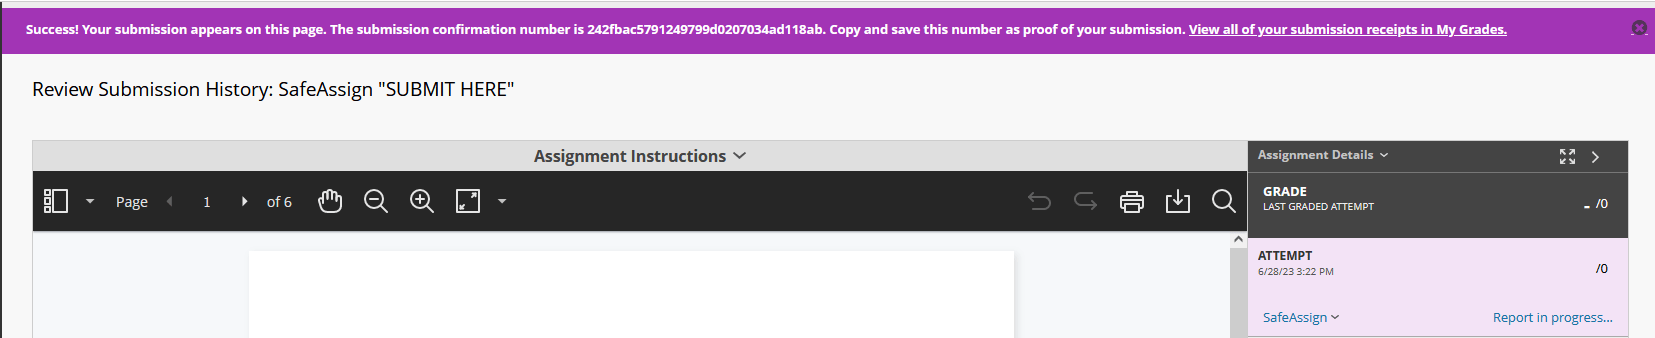 Purple bar at top with confirmation code